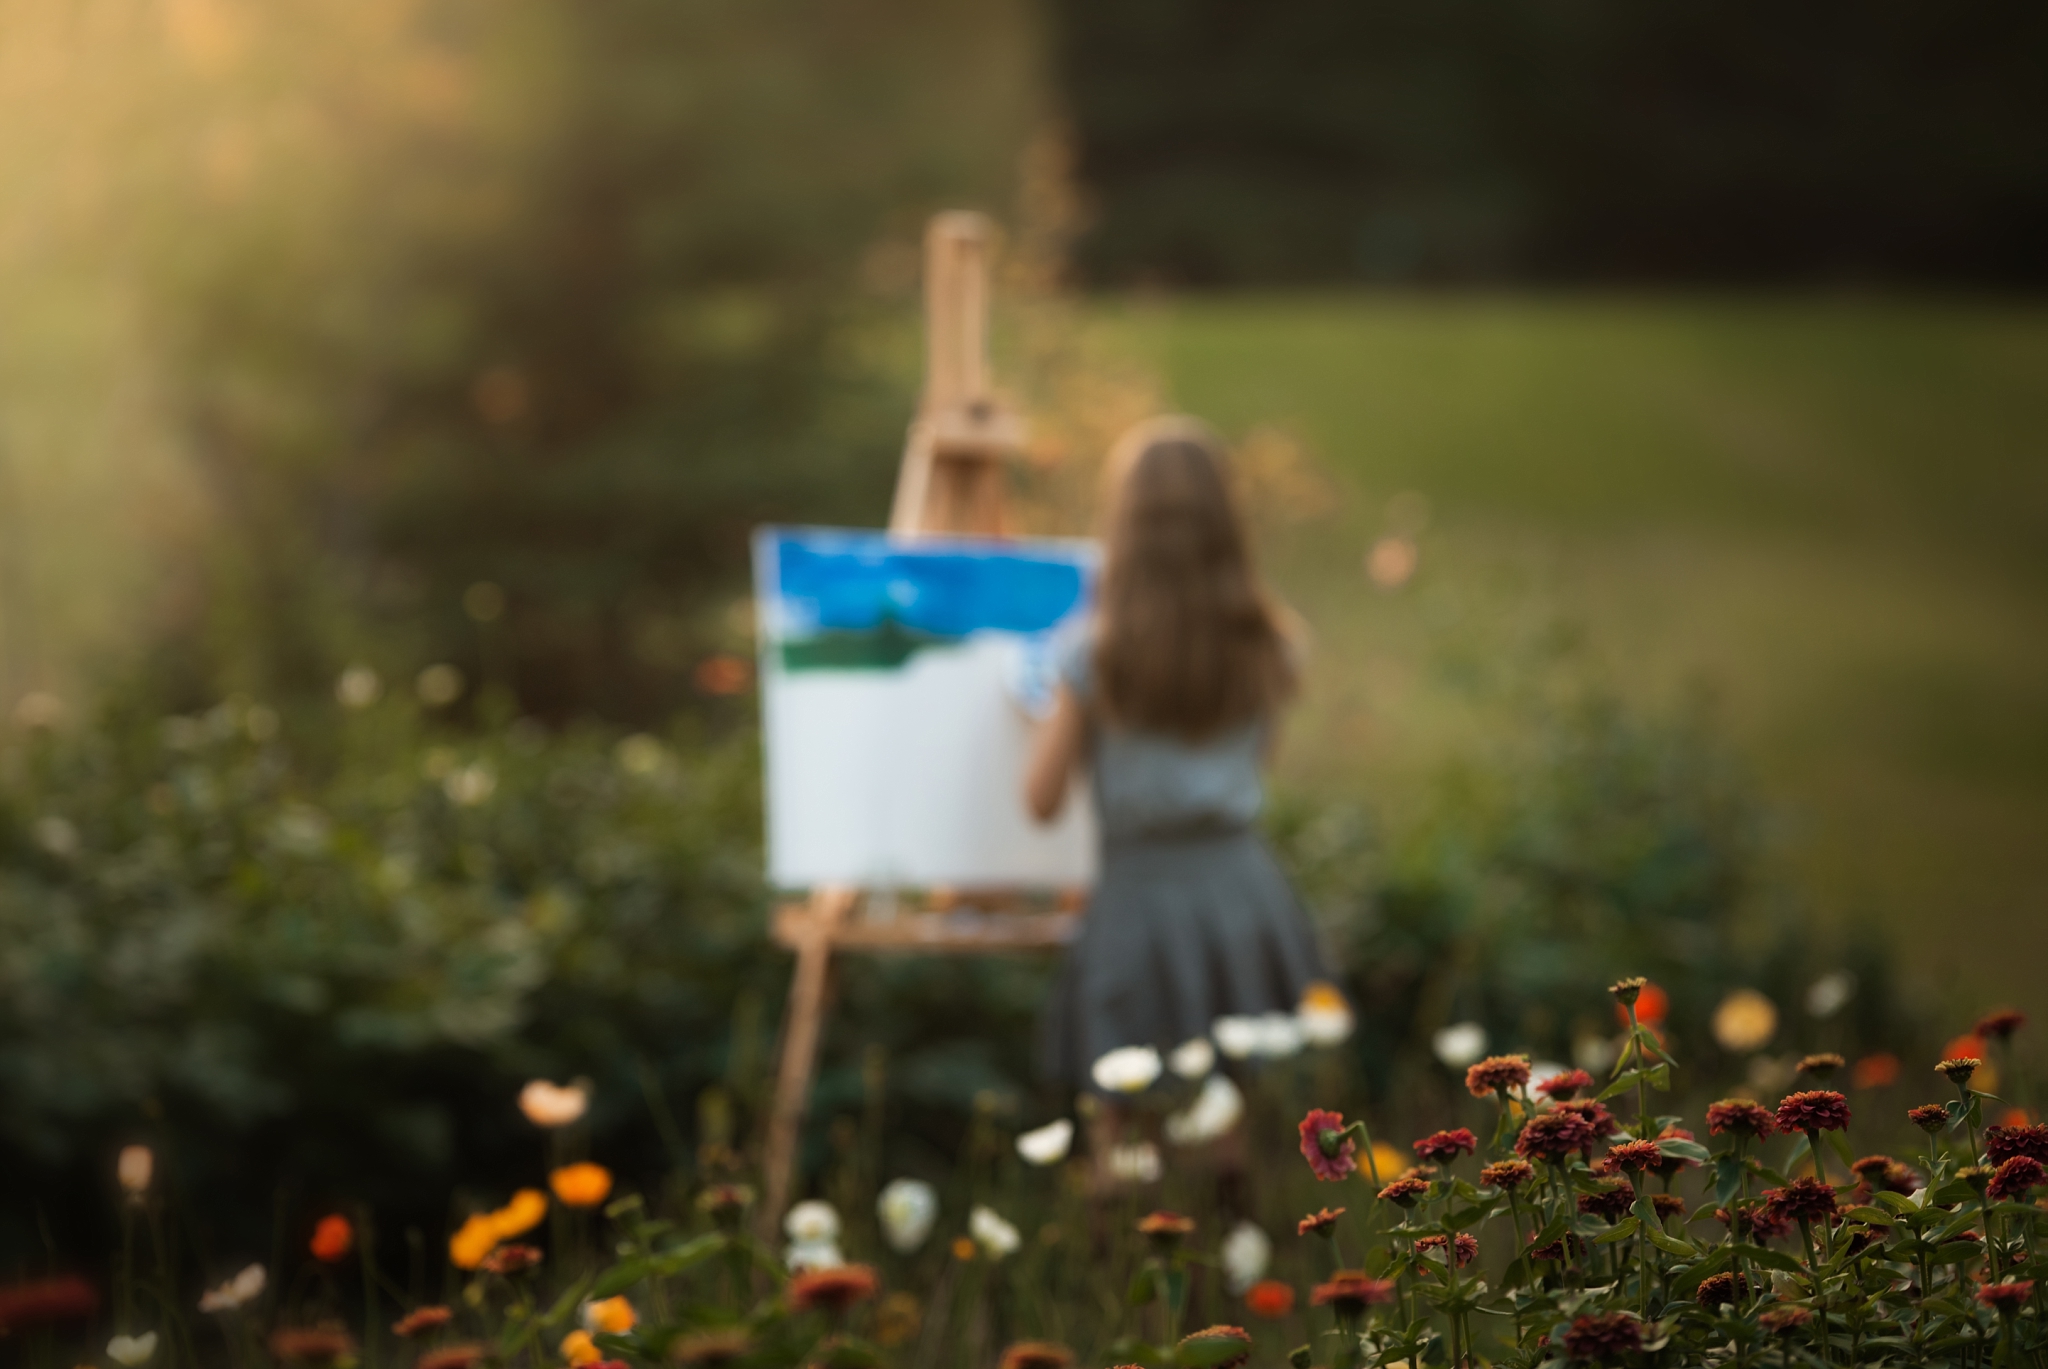 From backyard to dream location - girl outdoors painting